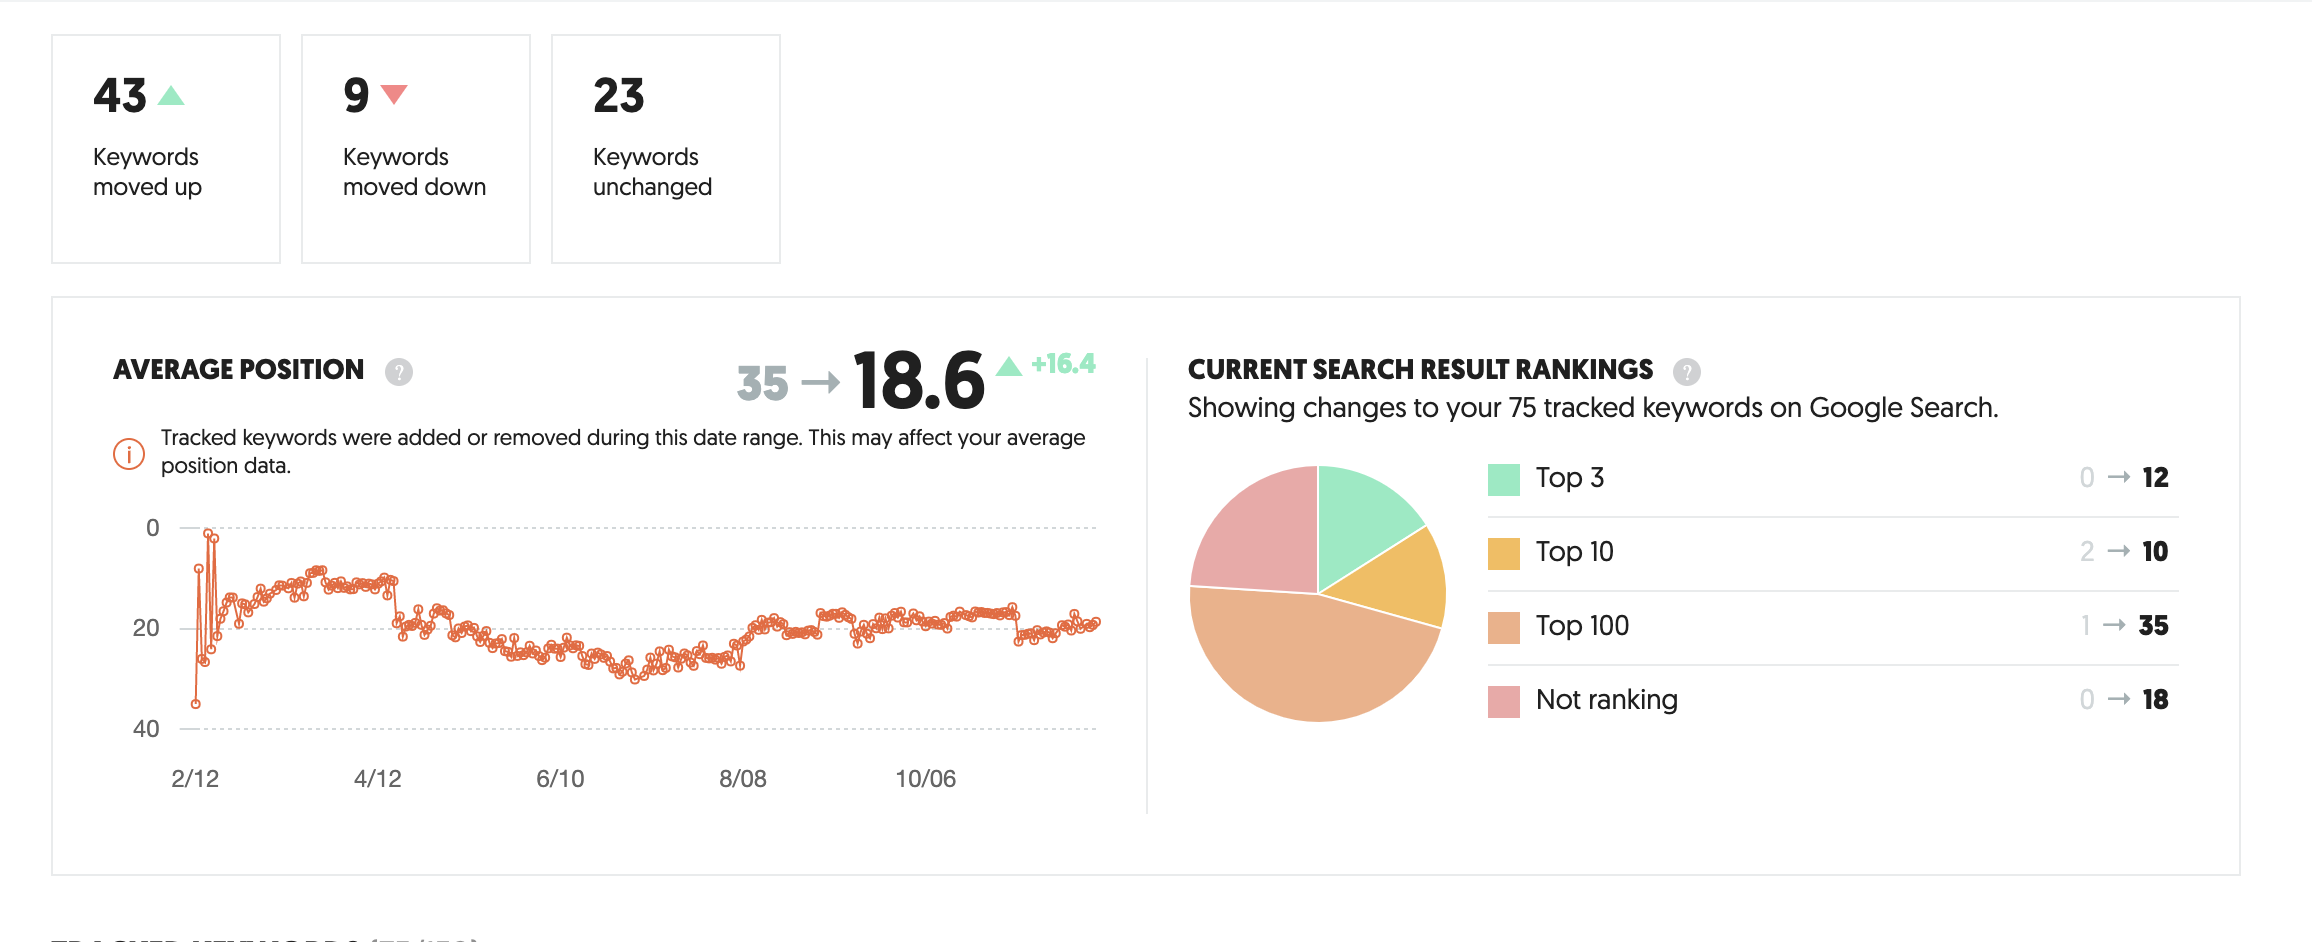 Keywords tracking and results